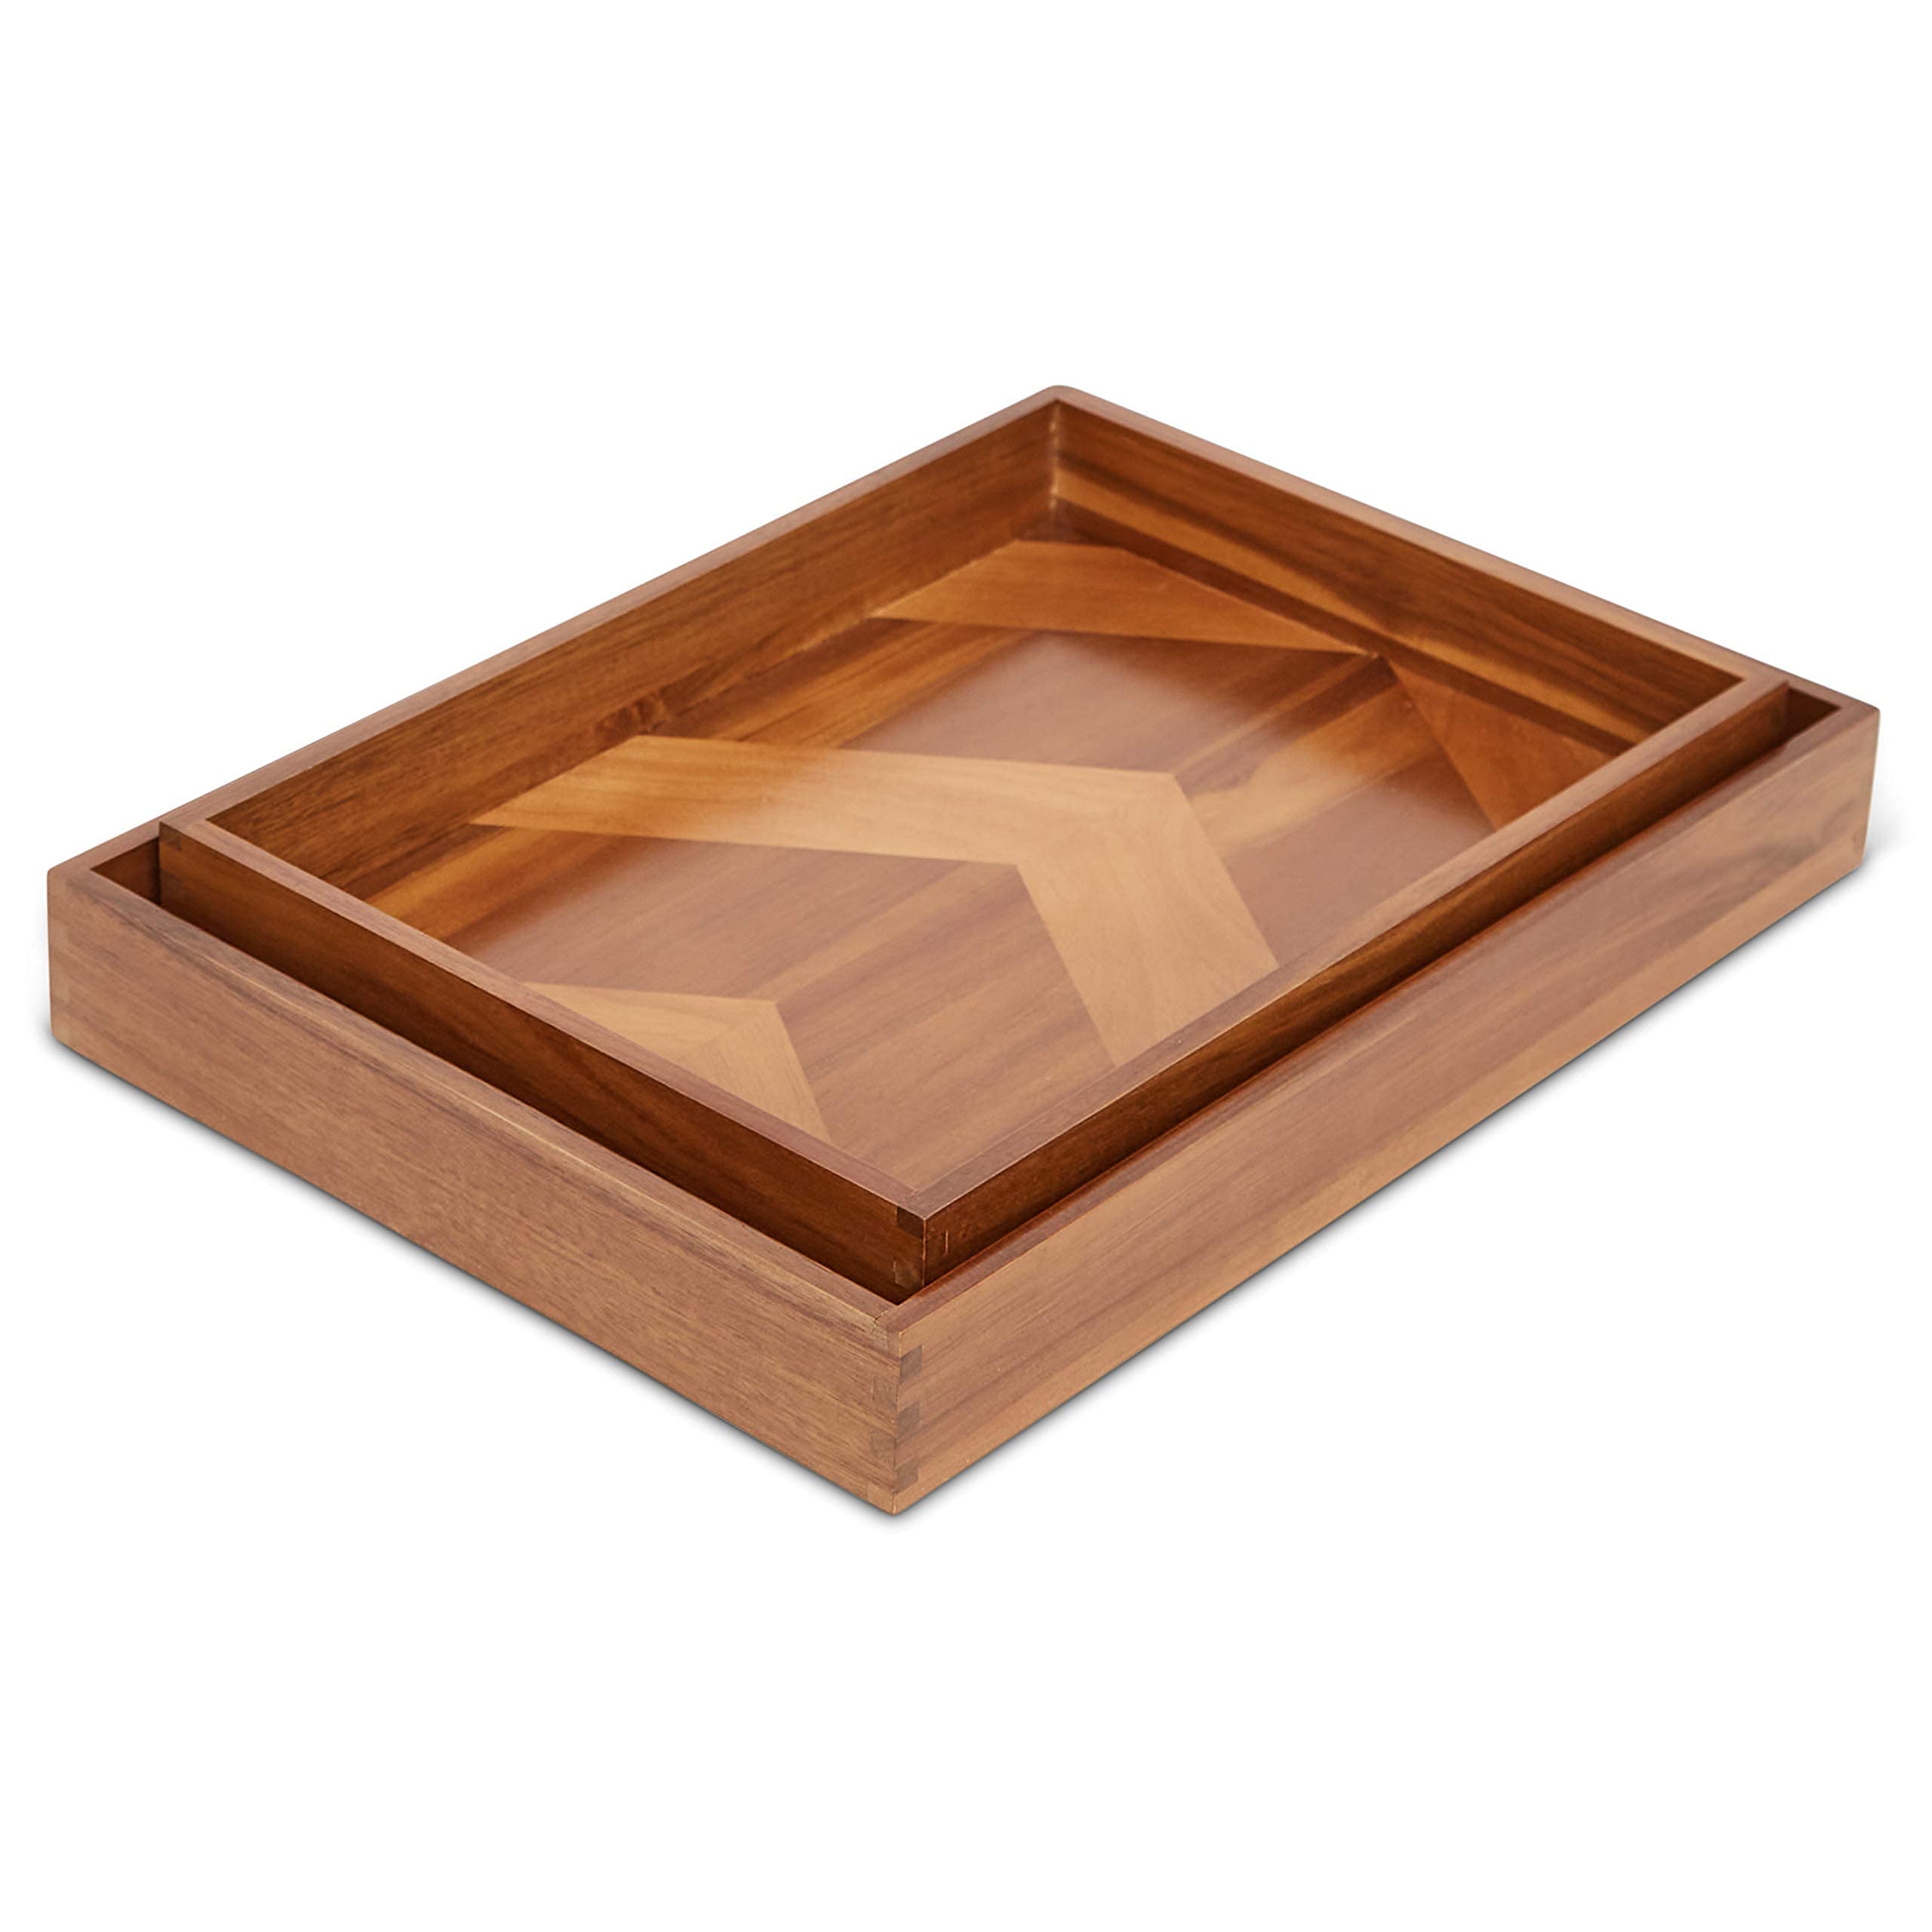 Acacia Wood Serving Tray, Coffee Table Tray, Ottoman Tray, Decorative Tray, Serving Tray, Set of 2 Wooden Trays (Large & Medium) (Without Handles)